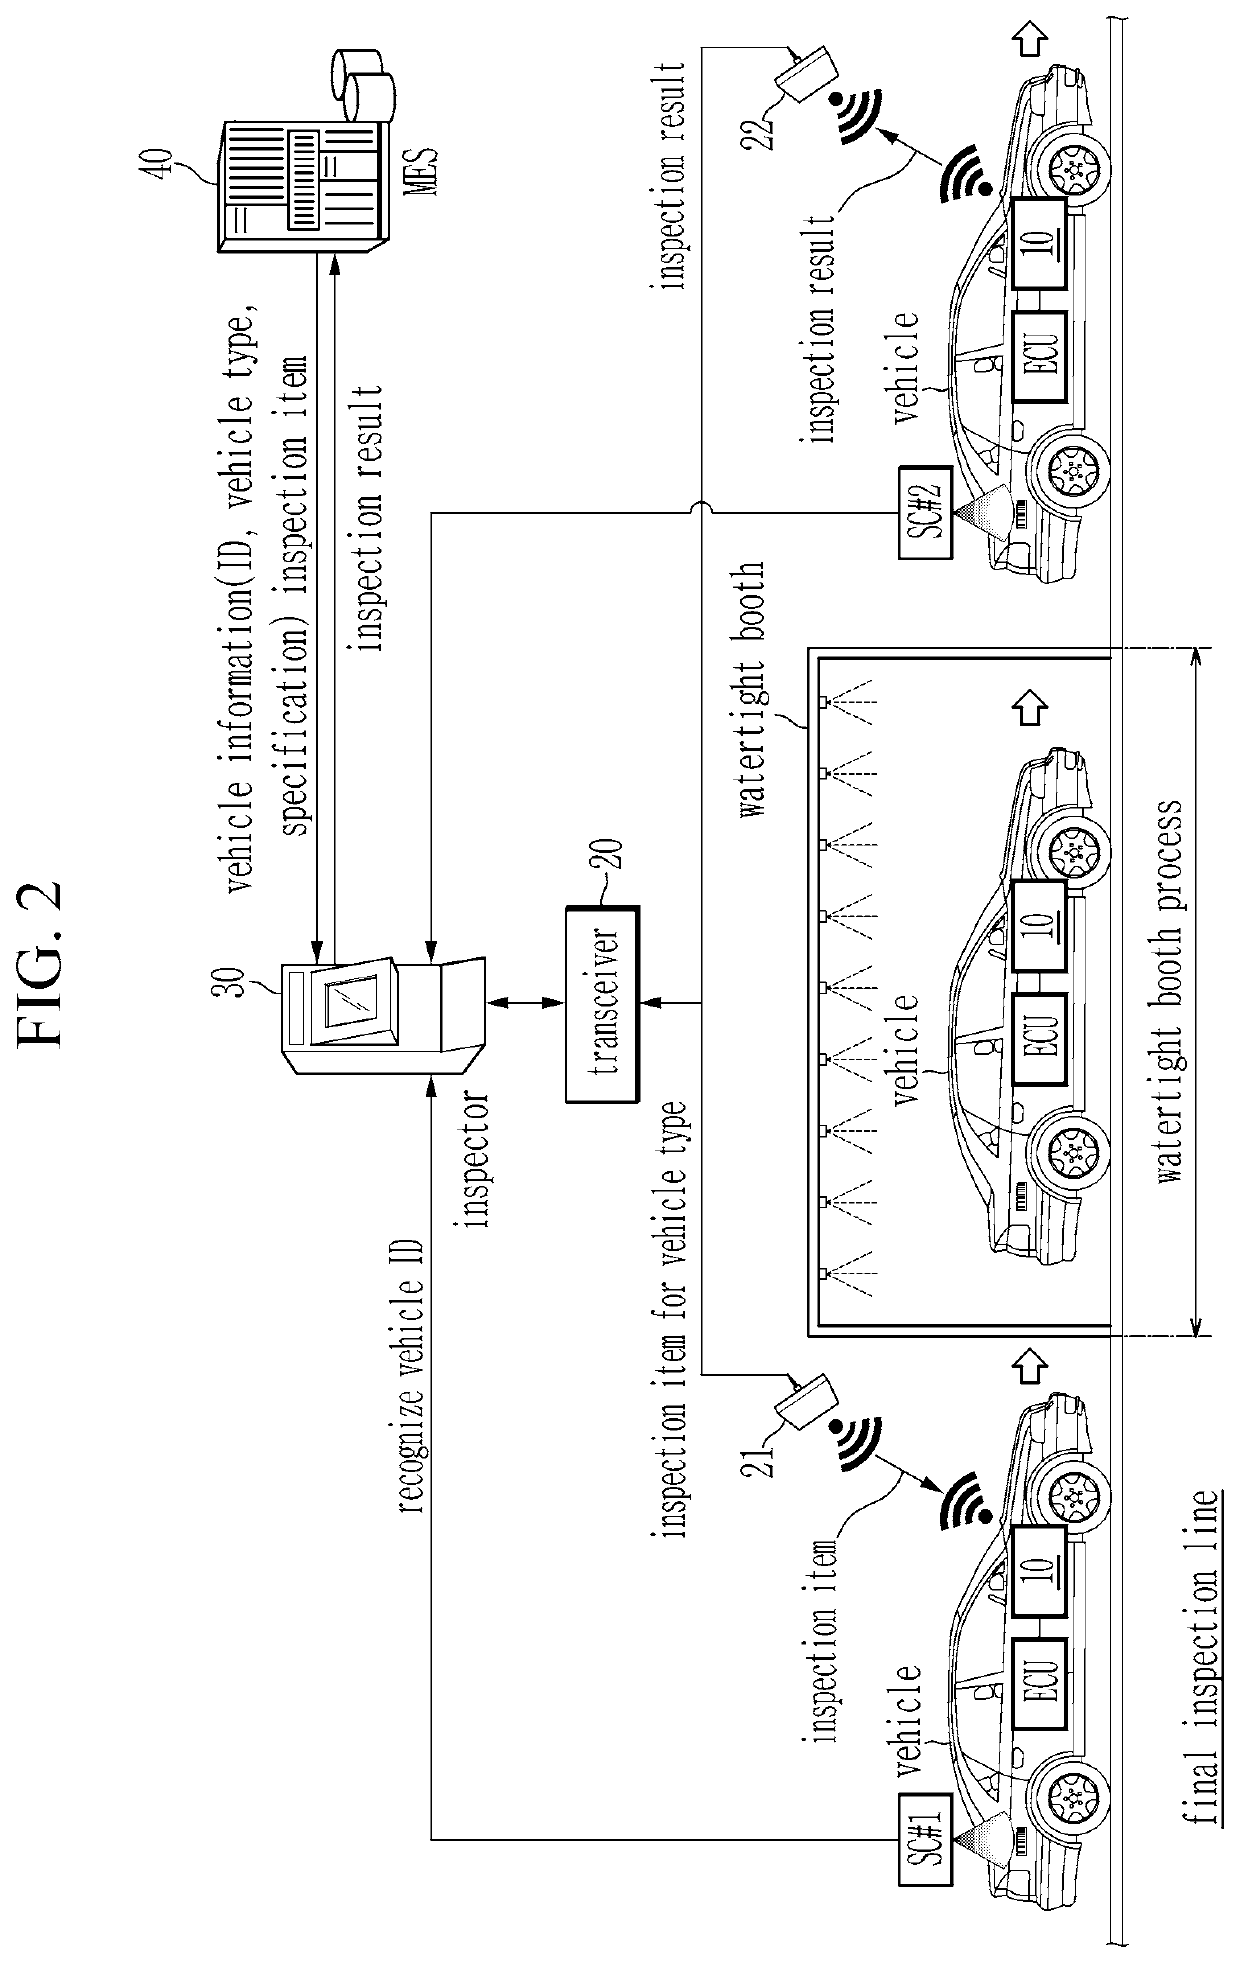 System and method for vehicle inspection